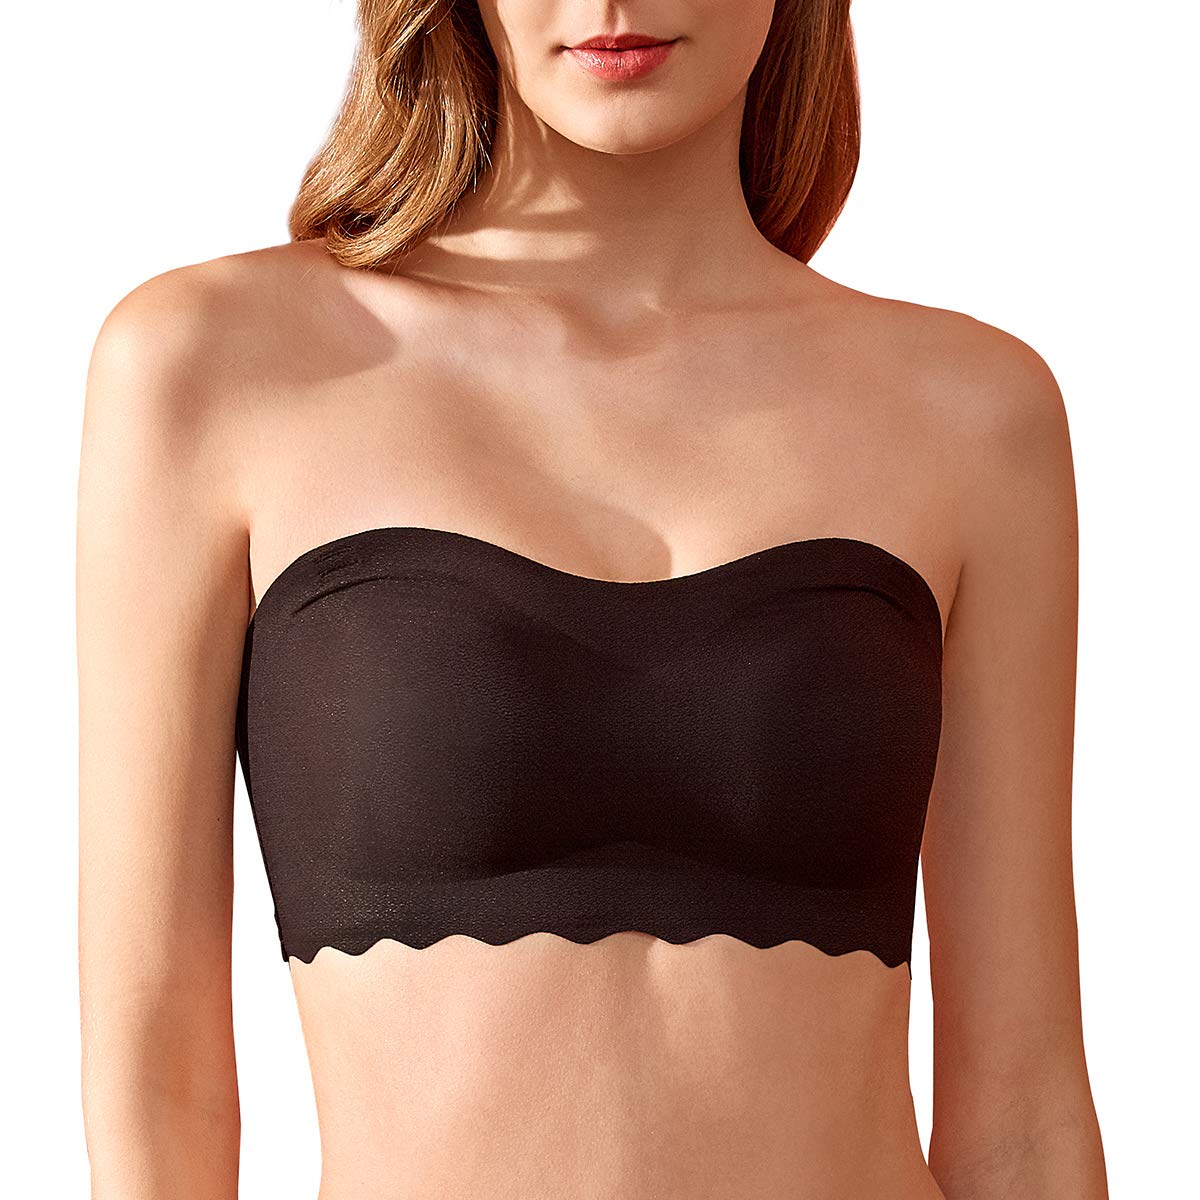 WOWENY Strapless Bras for Women Push Up Non-Slip Bandeau Wireless Bralette  Seamless Bra Padded Comfy Tube Top(A-Black, Large) at  Women's  Clothing store